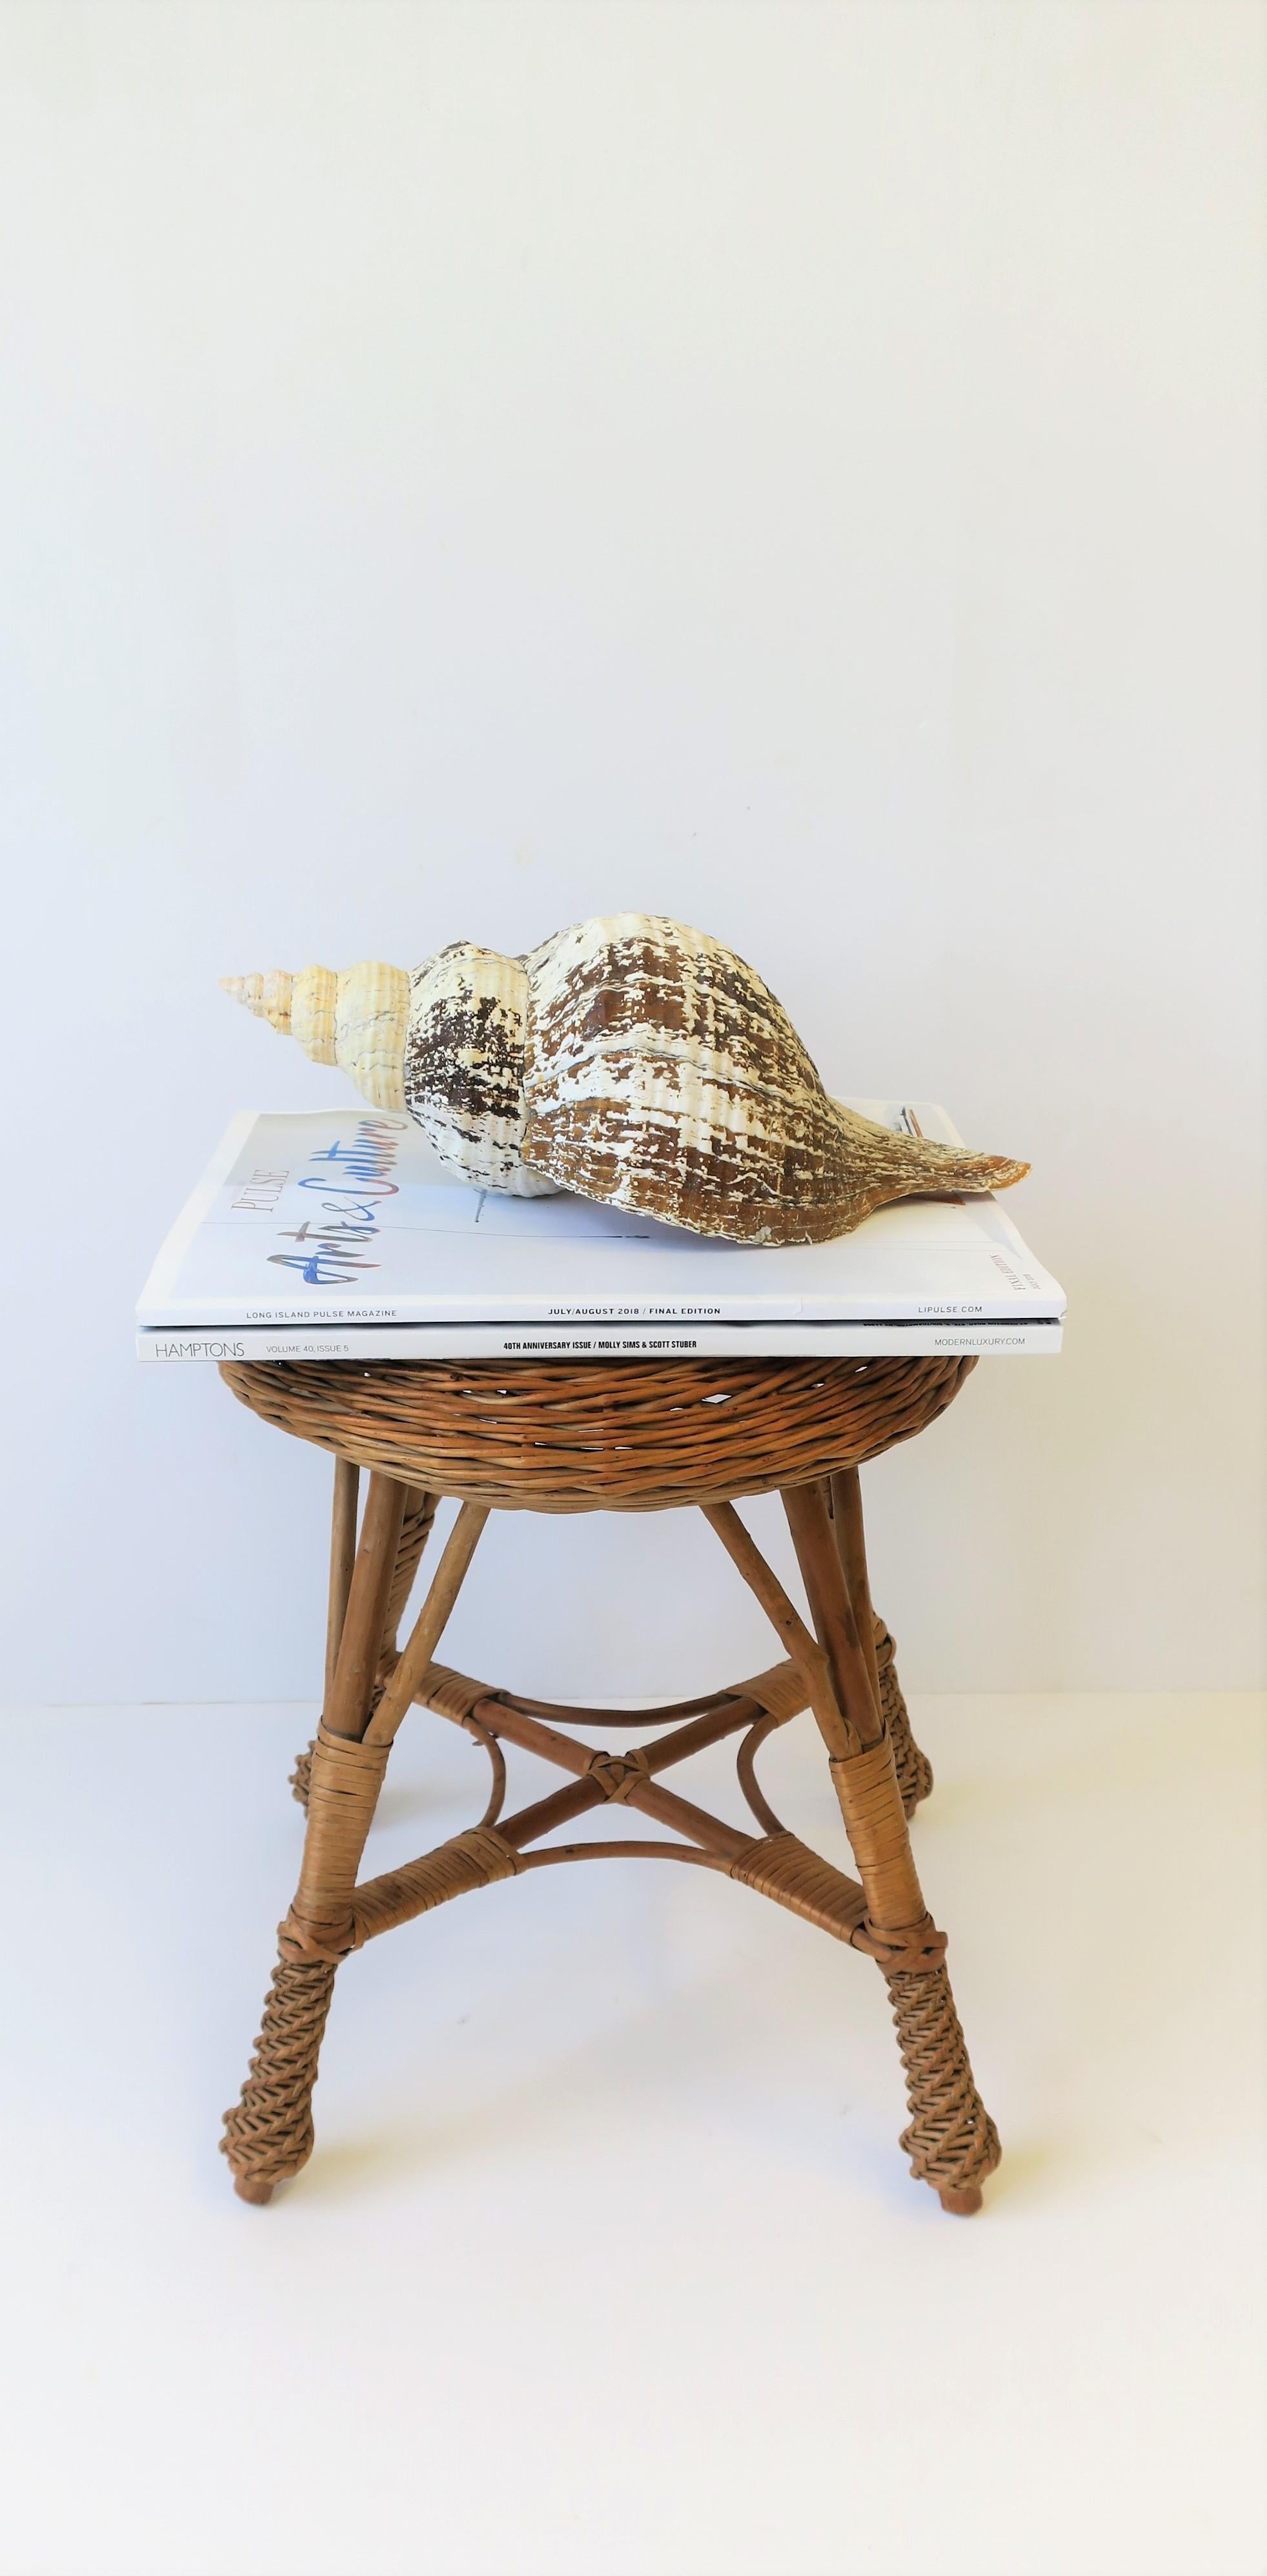 Woven Midcentury Wicker Rattan and Wood Stool or Side Table